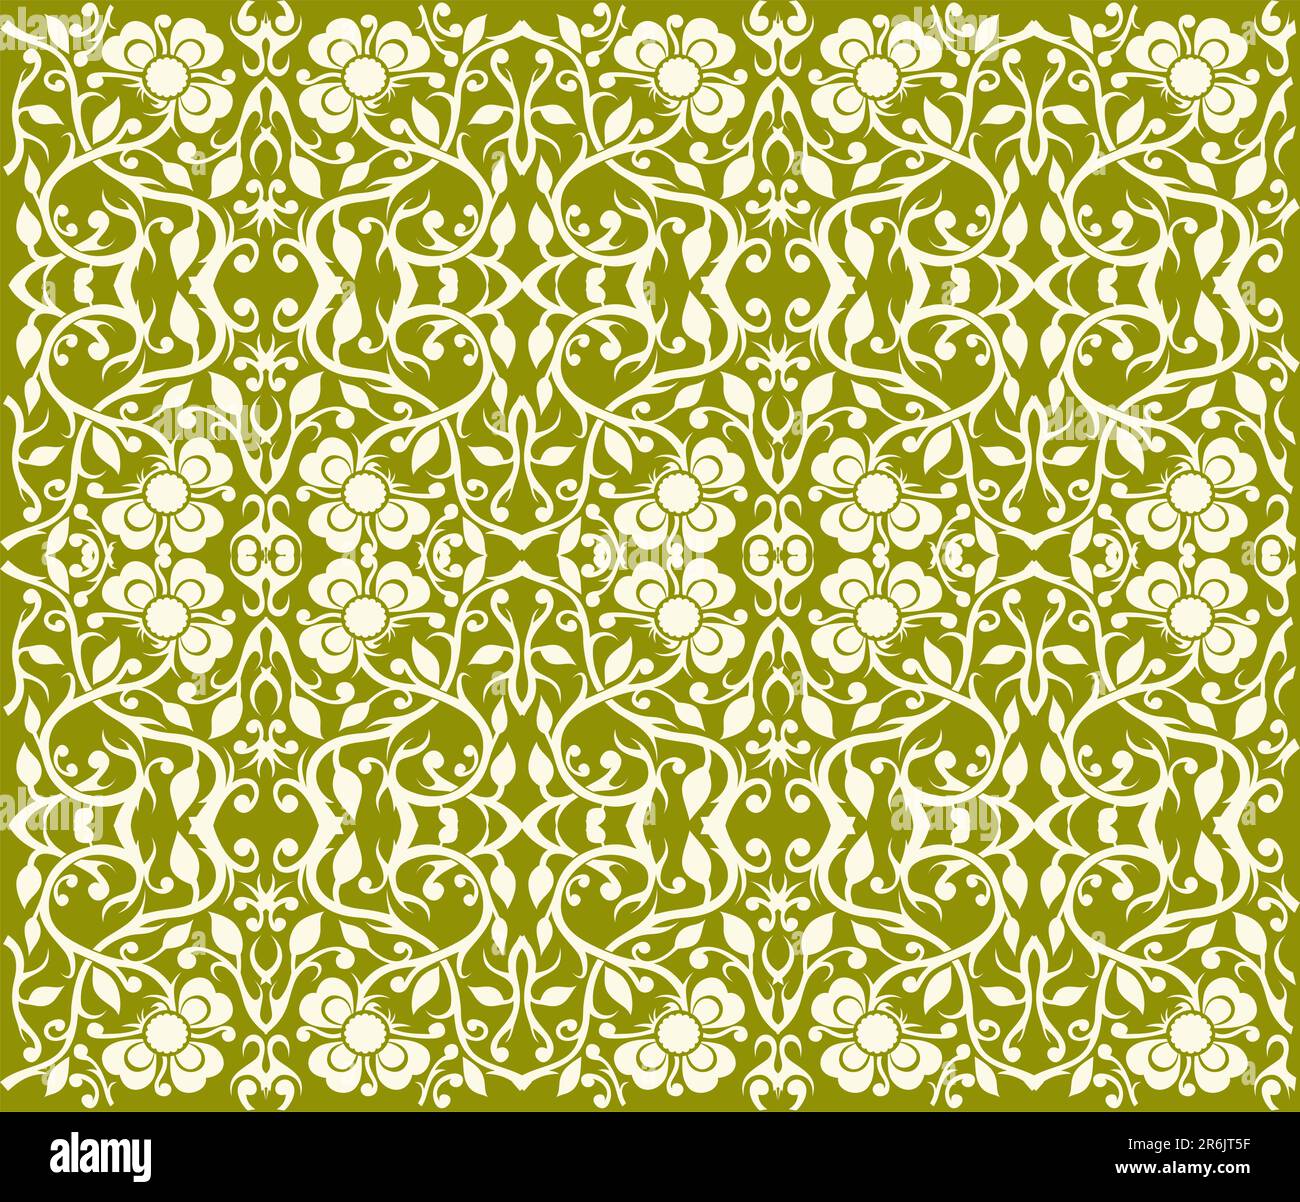 Floral pattern - vector Stock Vector